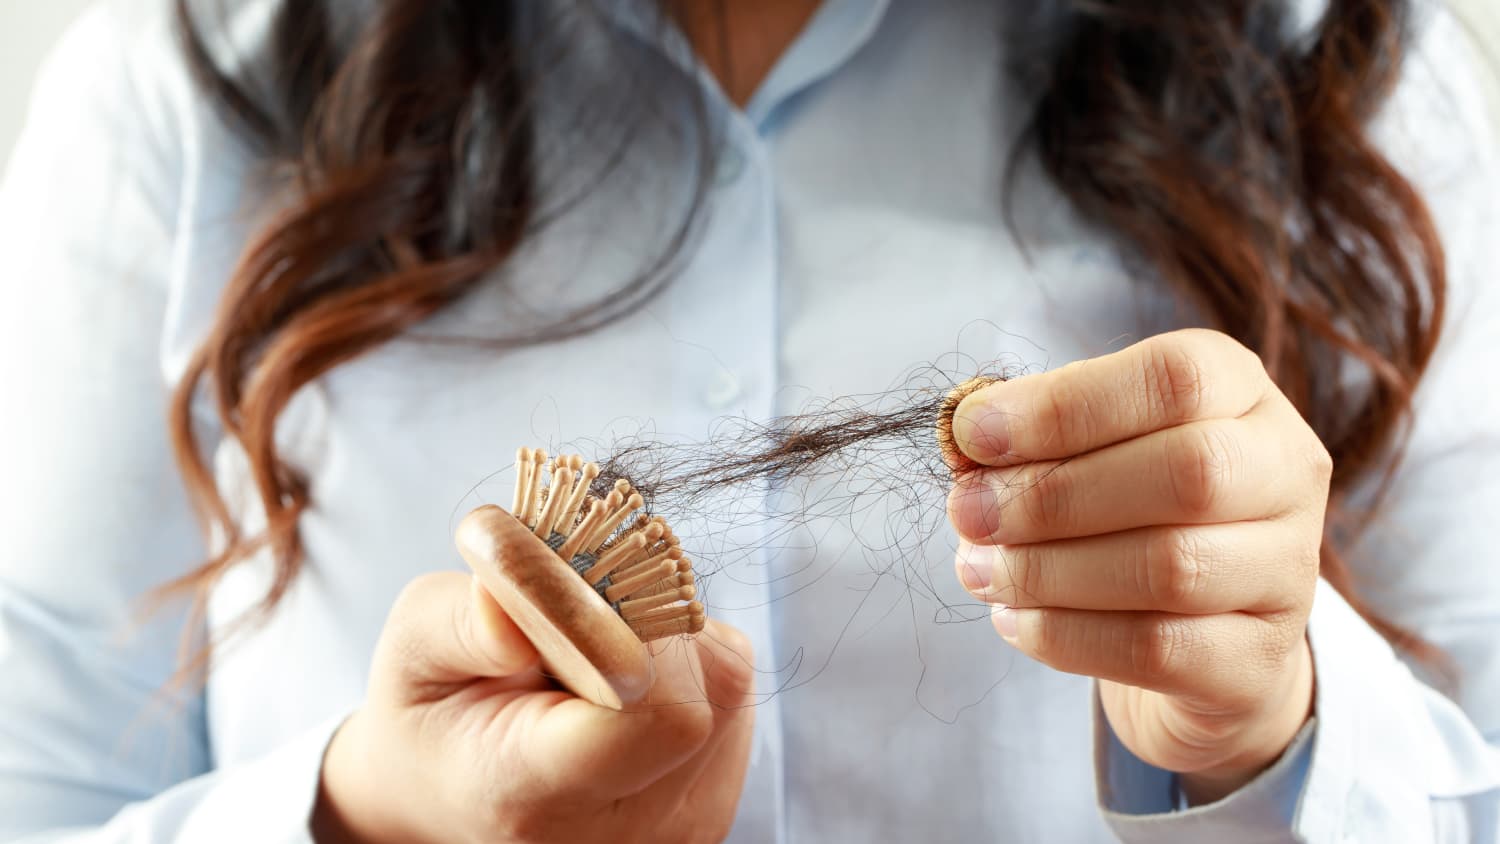 woman holding brush with hair on it, representing hair loss from alopecia areata